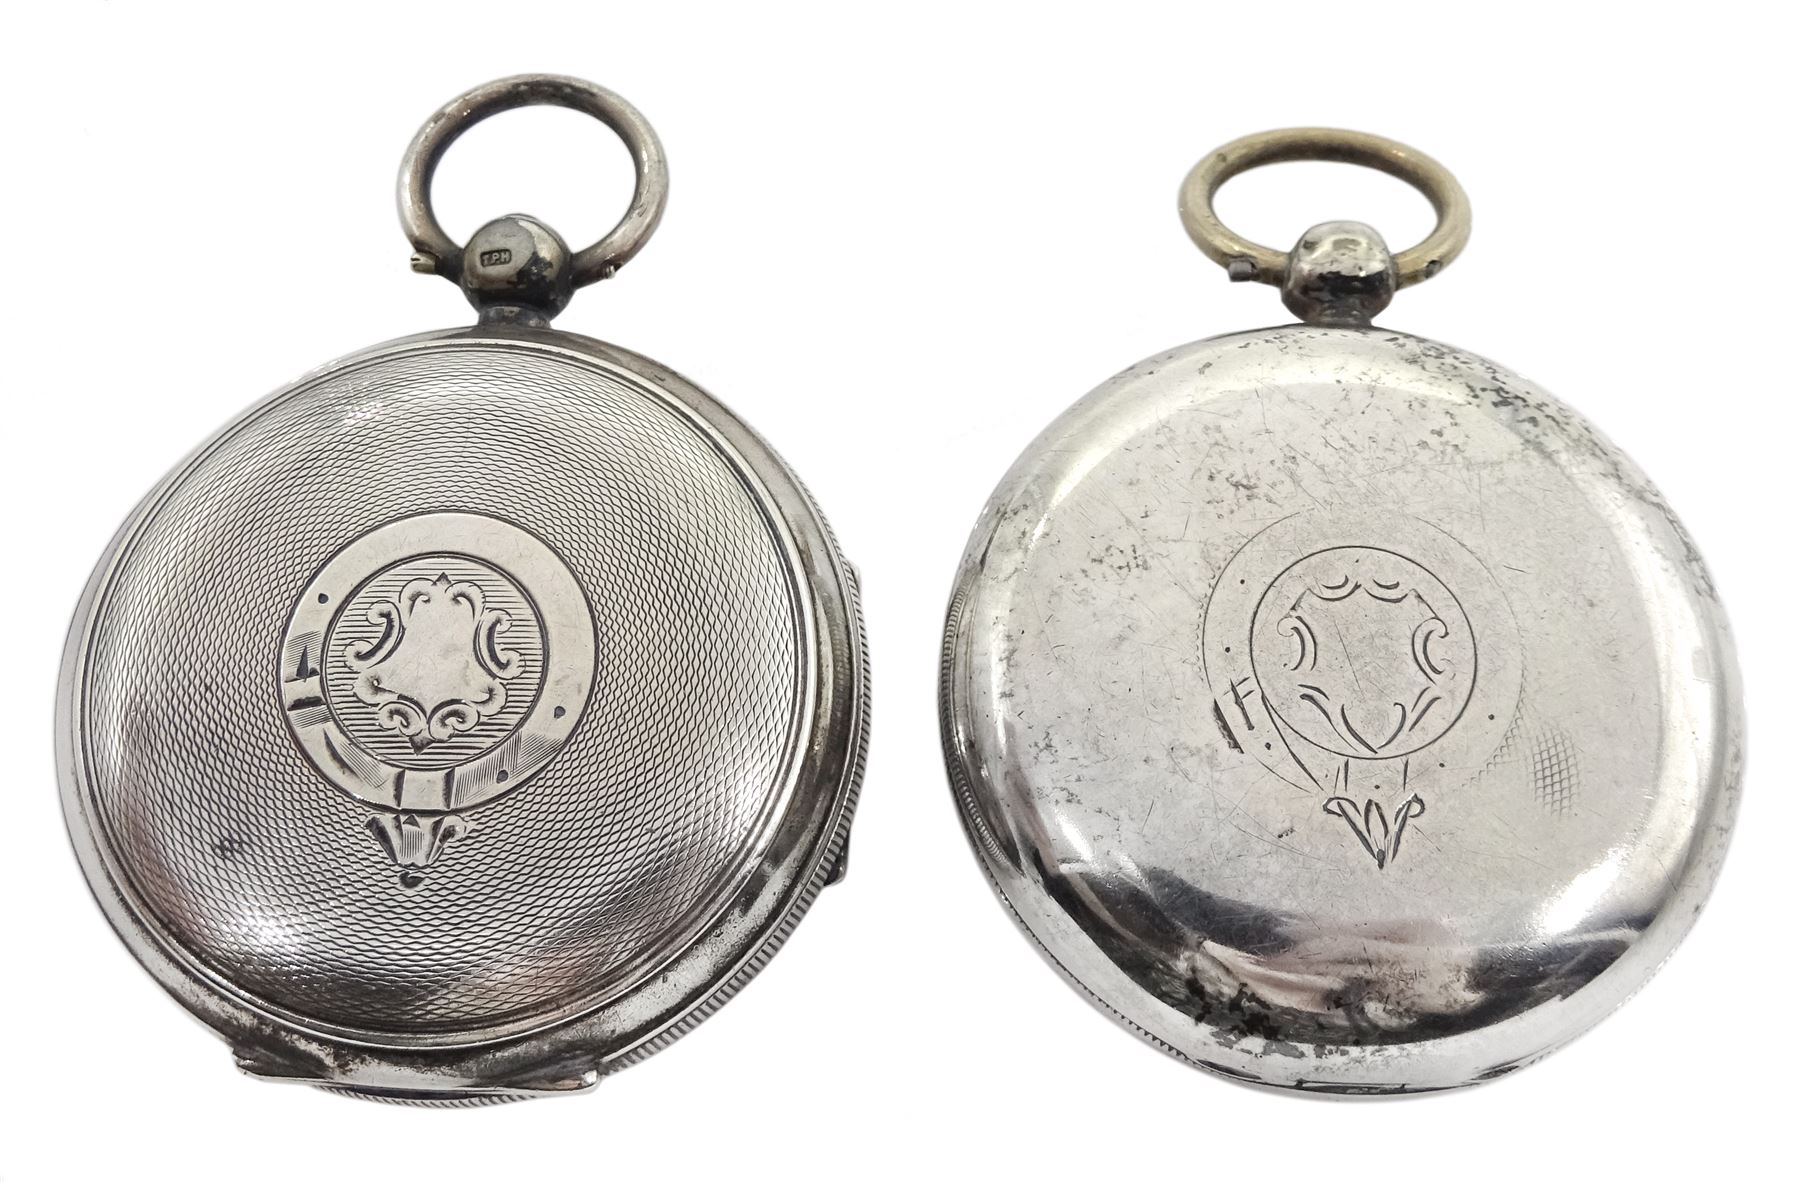 Edwardian silver open face 'The Express English Lever' pocket watch by J. G. Graves - Image 2 of 4